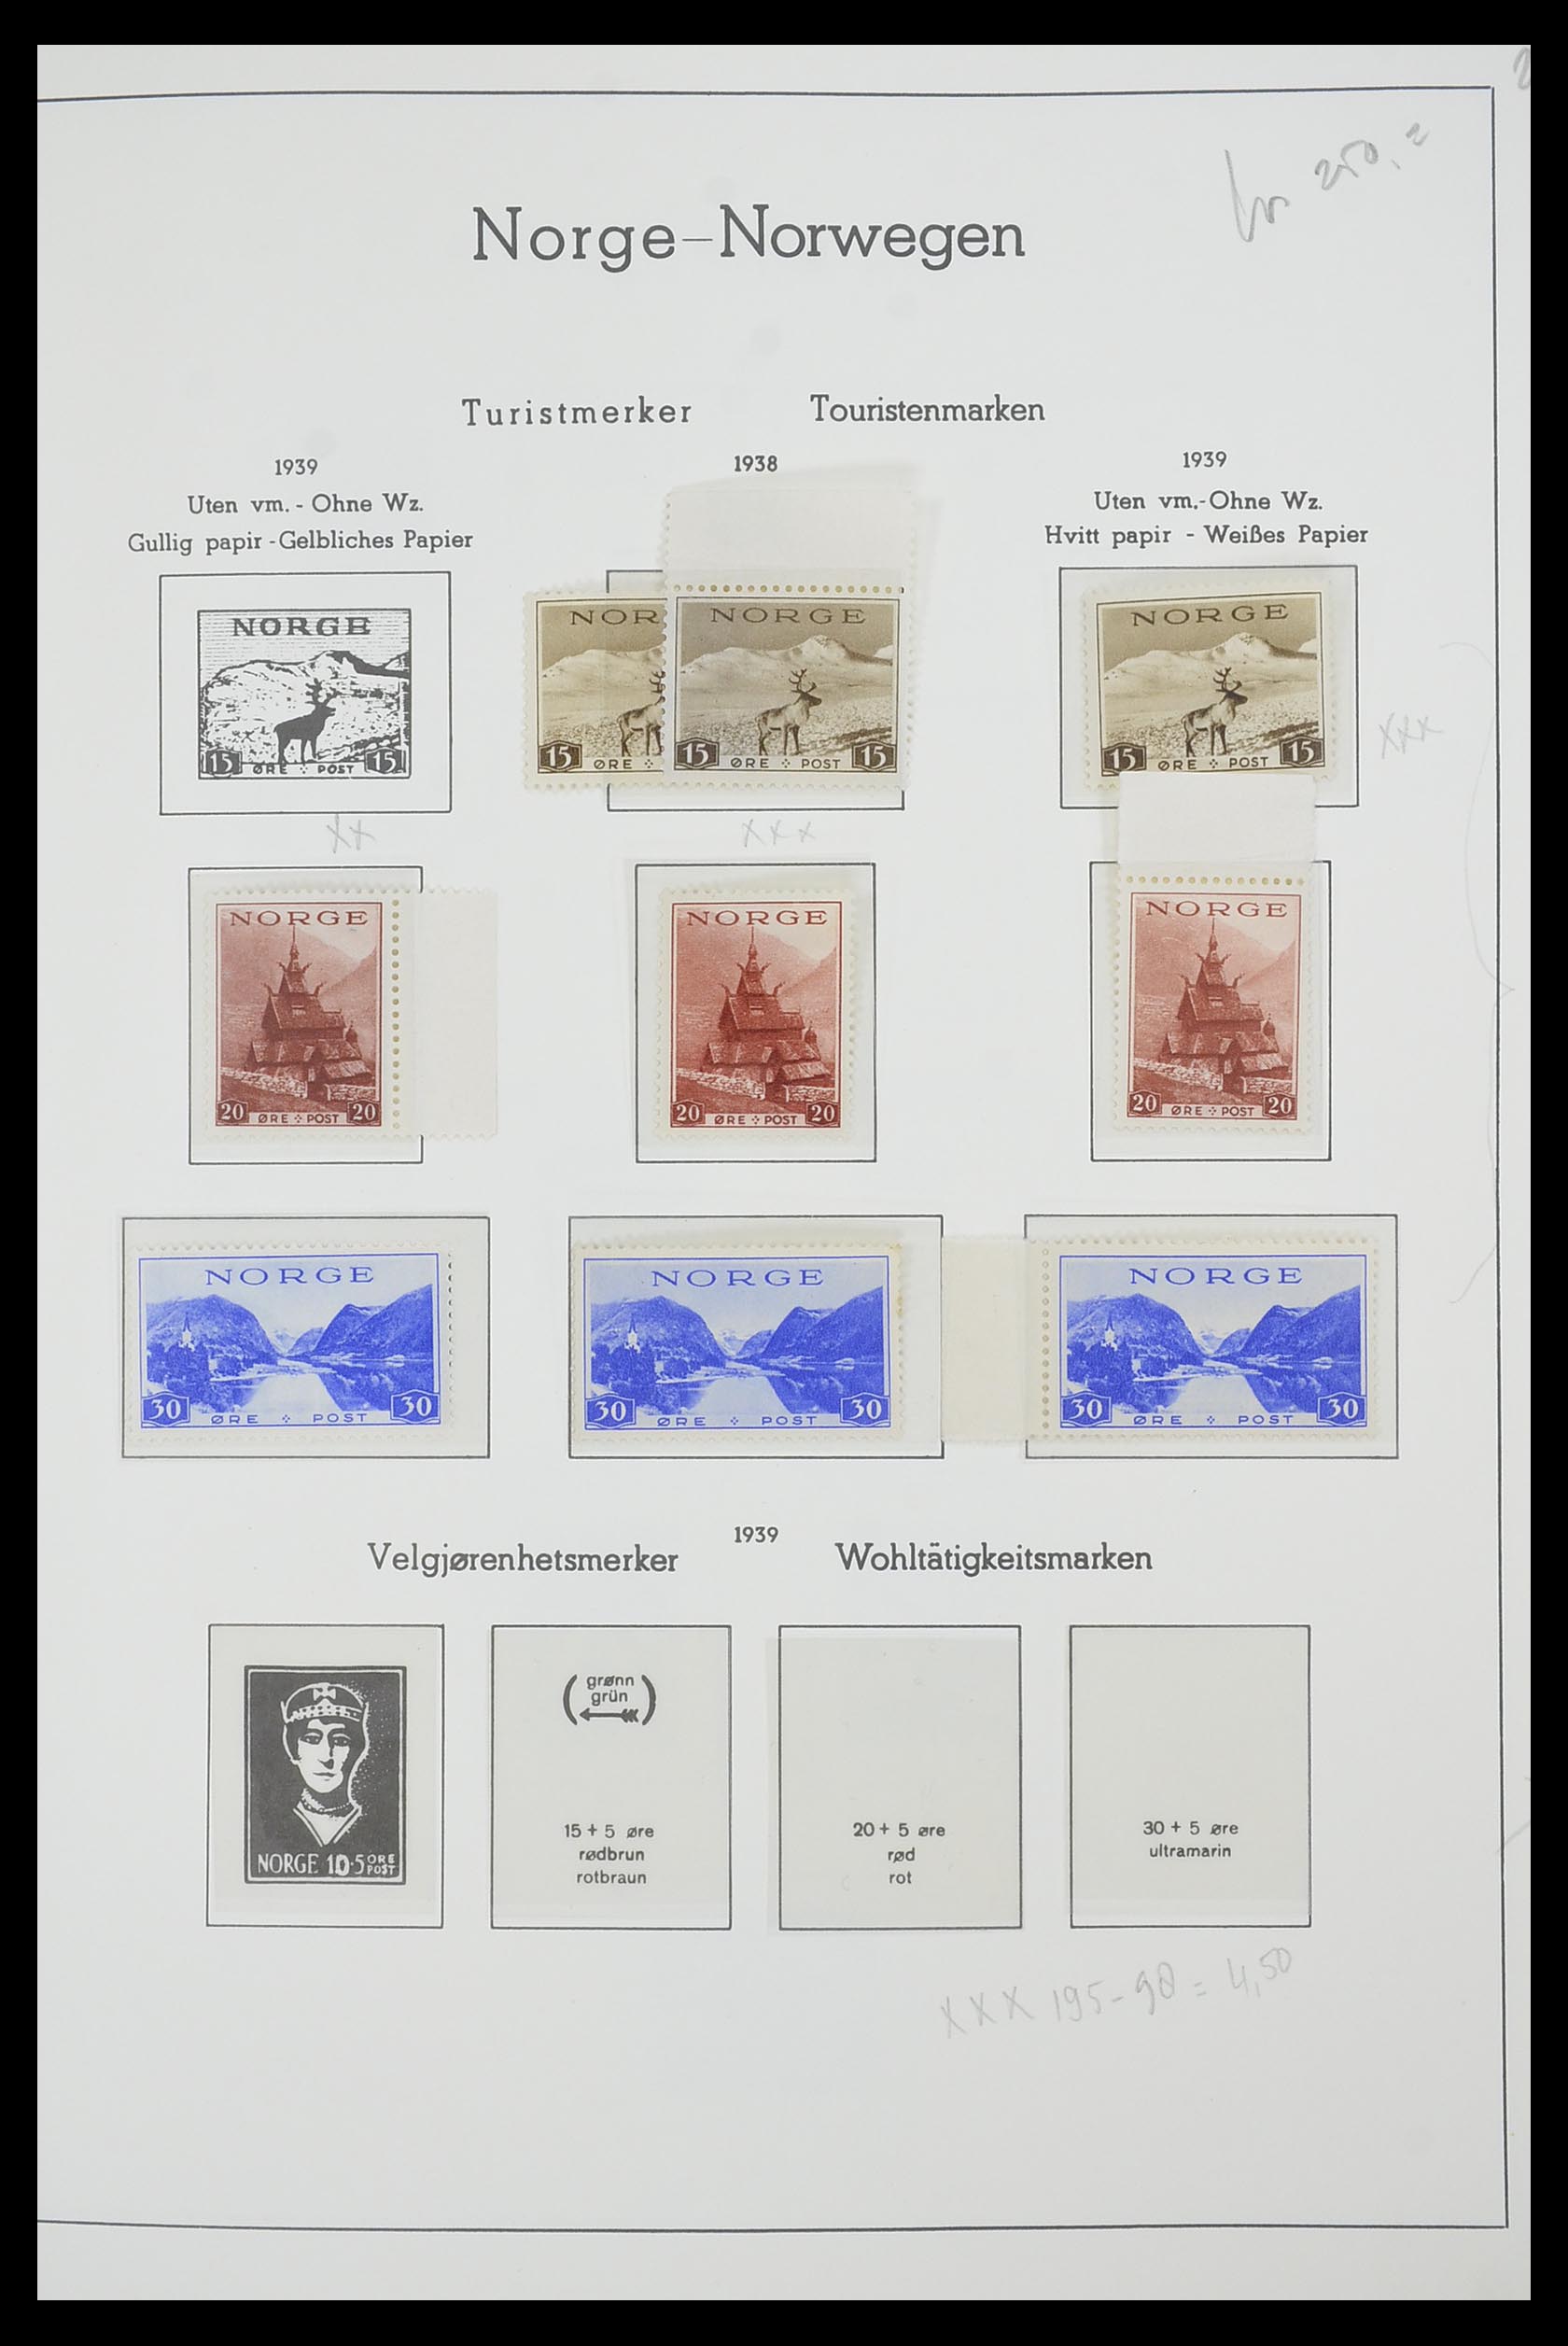 33661 032 - Stamp collection 33661 Norway 1856-2003.